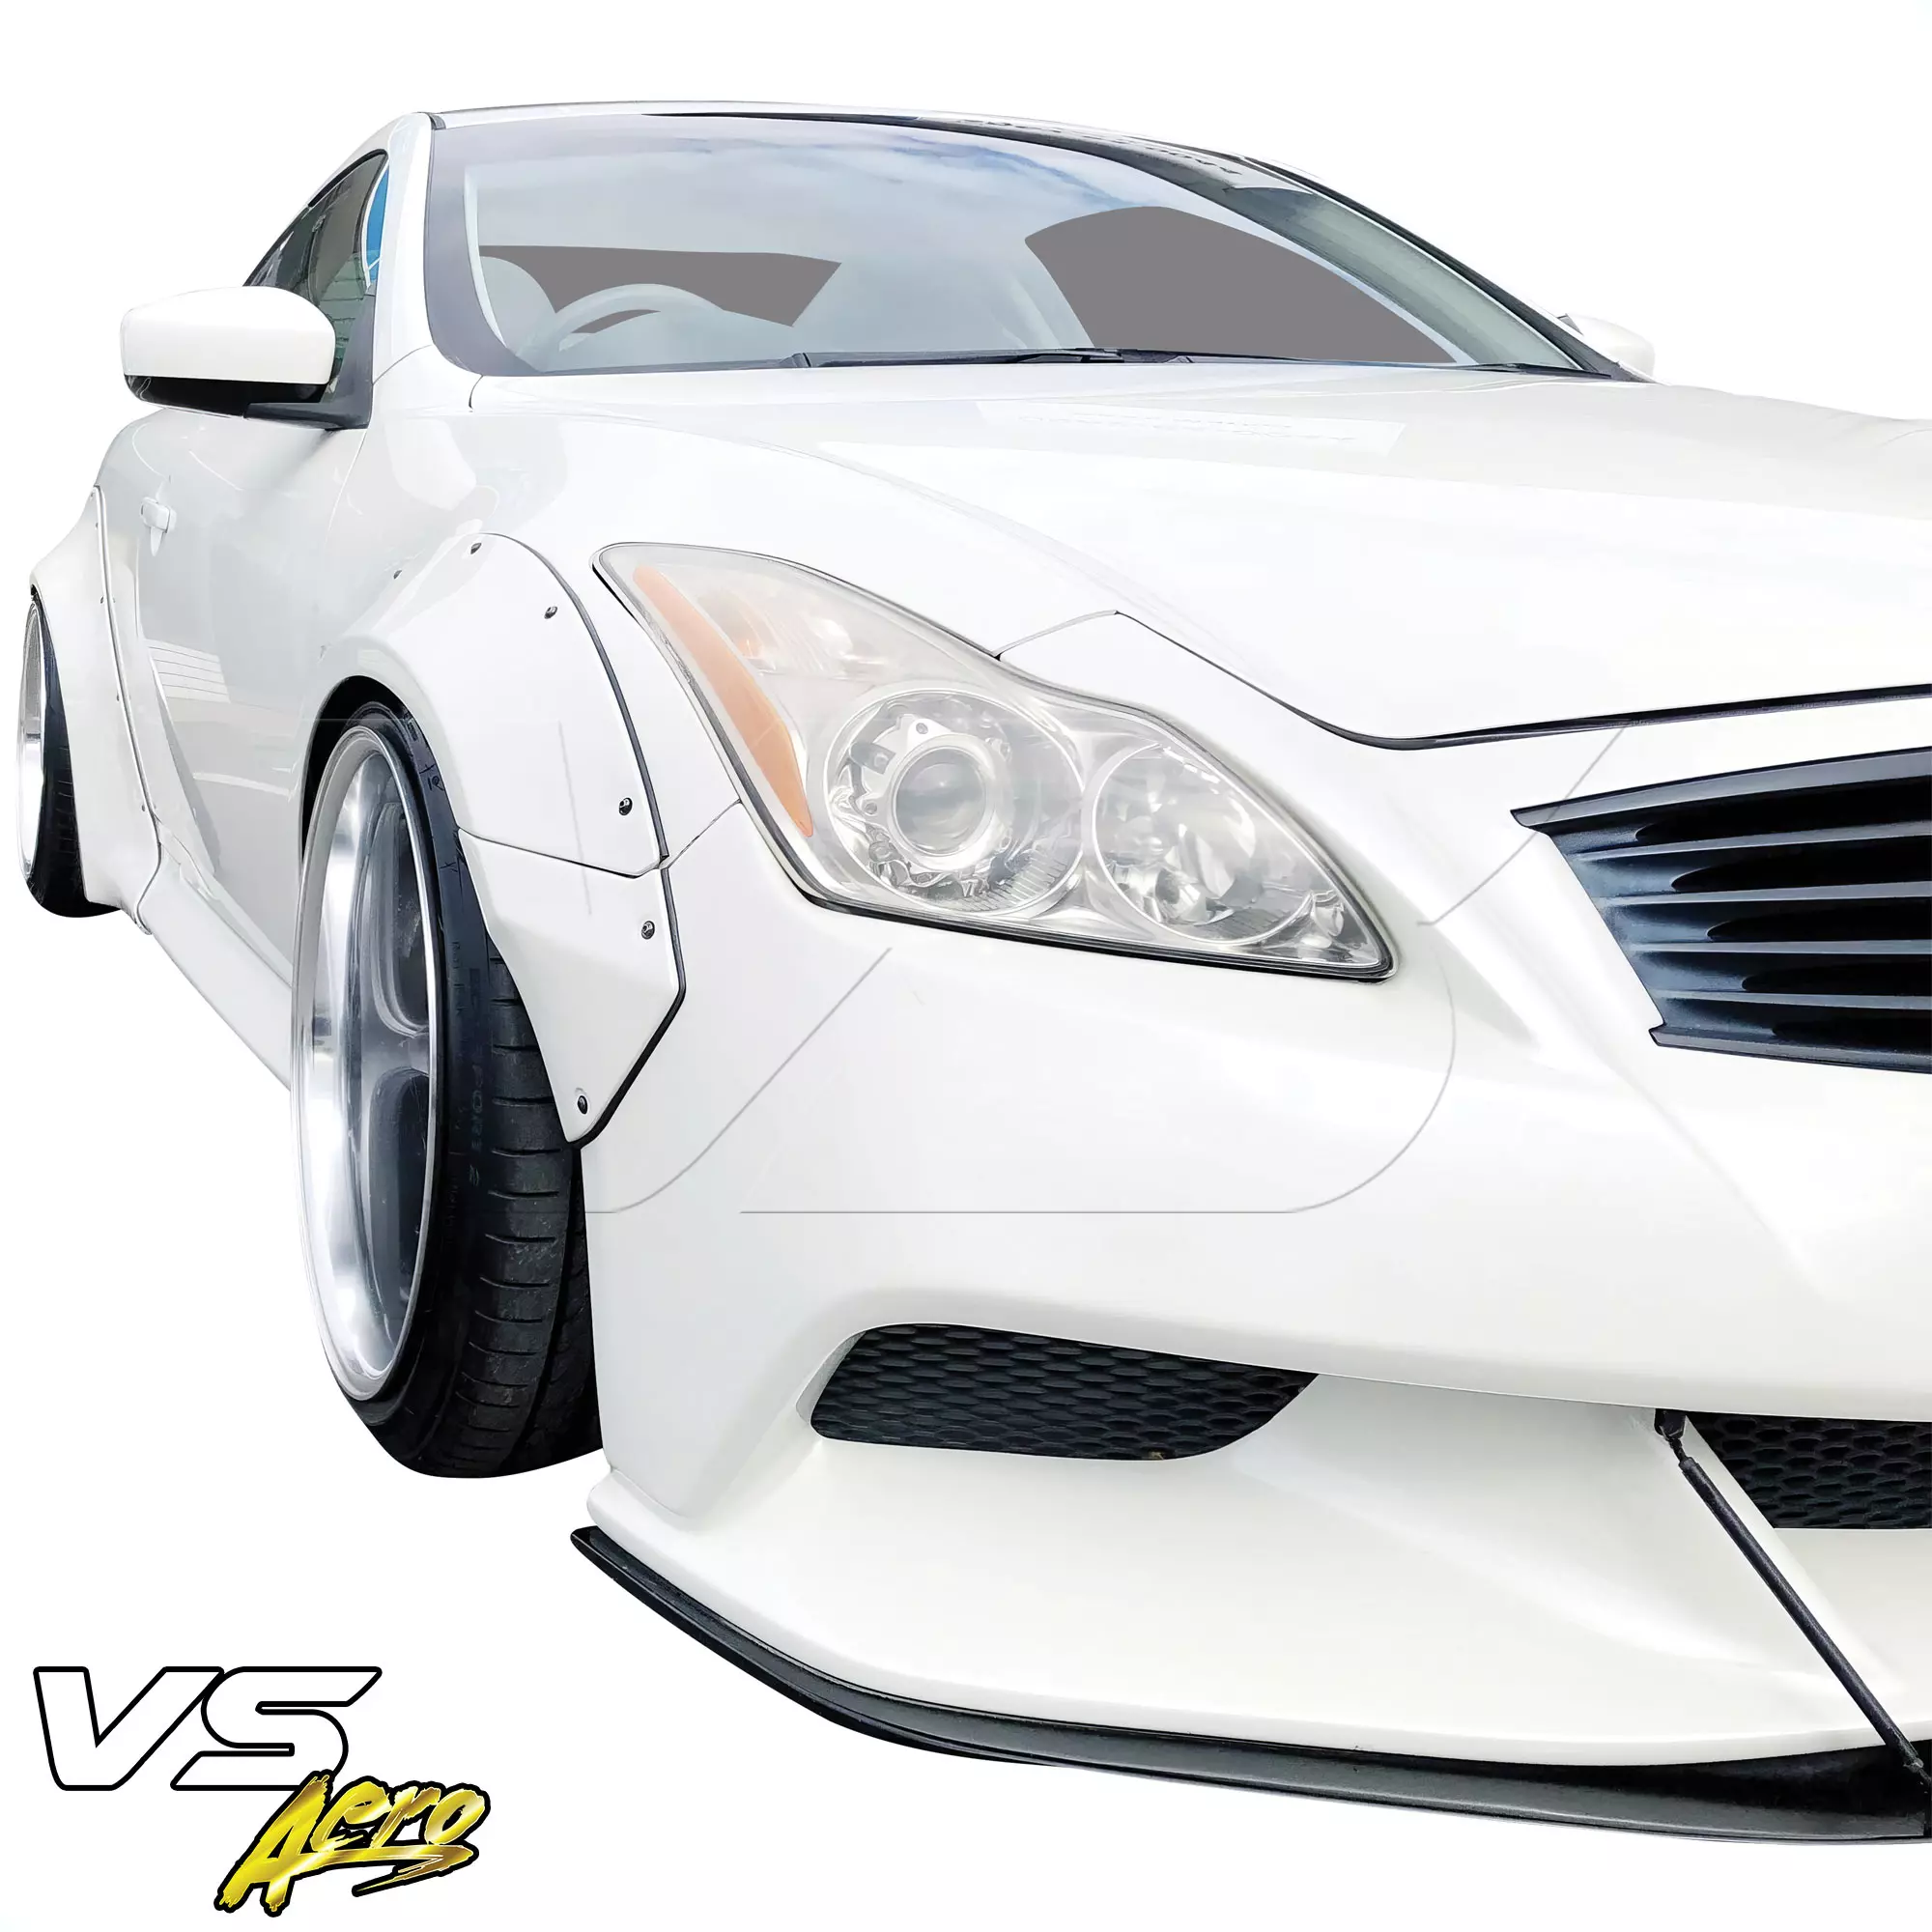 VSaero FRP LBPE Wide Body Fender Flares (front) 4pc > Infiniti G37 Coupe 2008-2015 > 2dr Coupe - Image 3